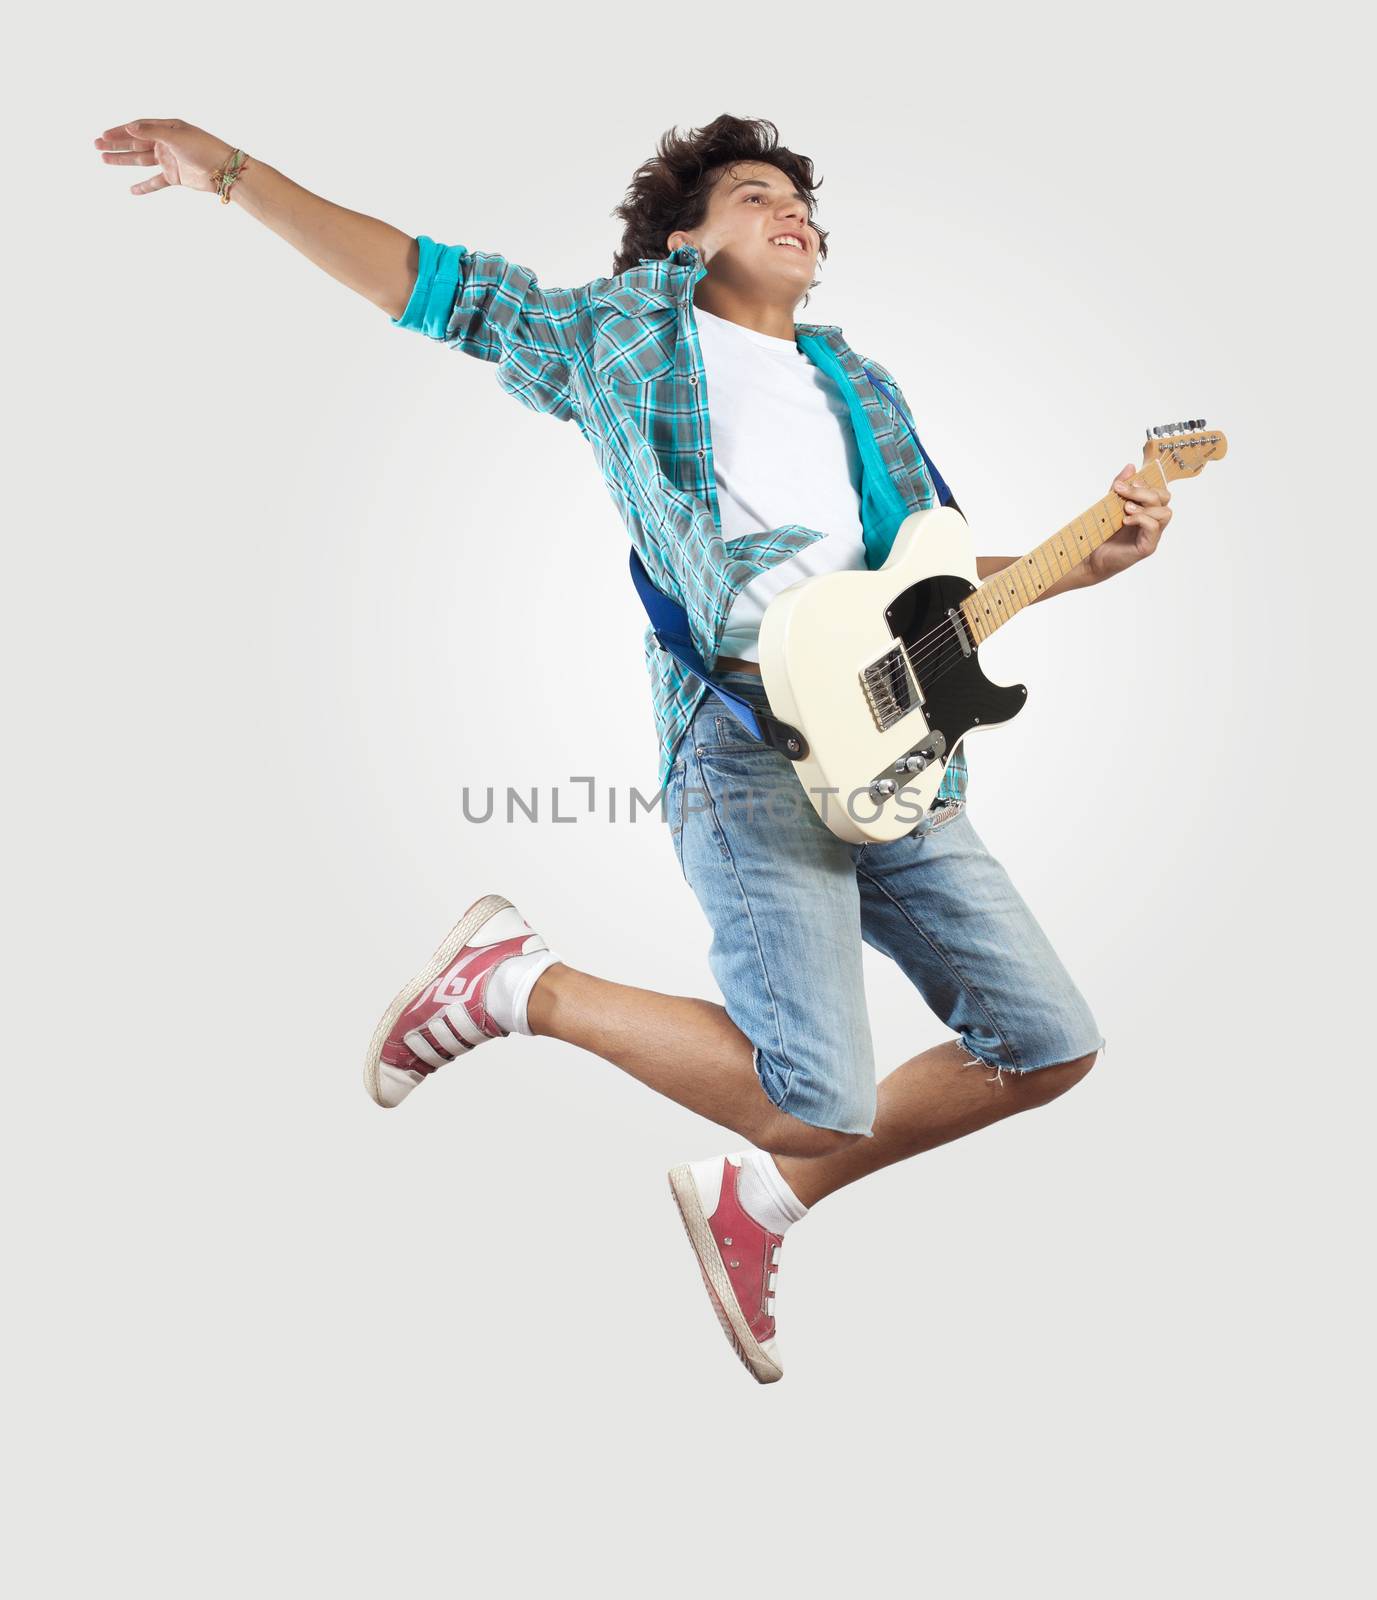 young man playing on electro guitar and jumping by sergey_nivens